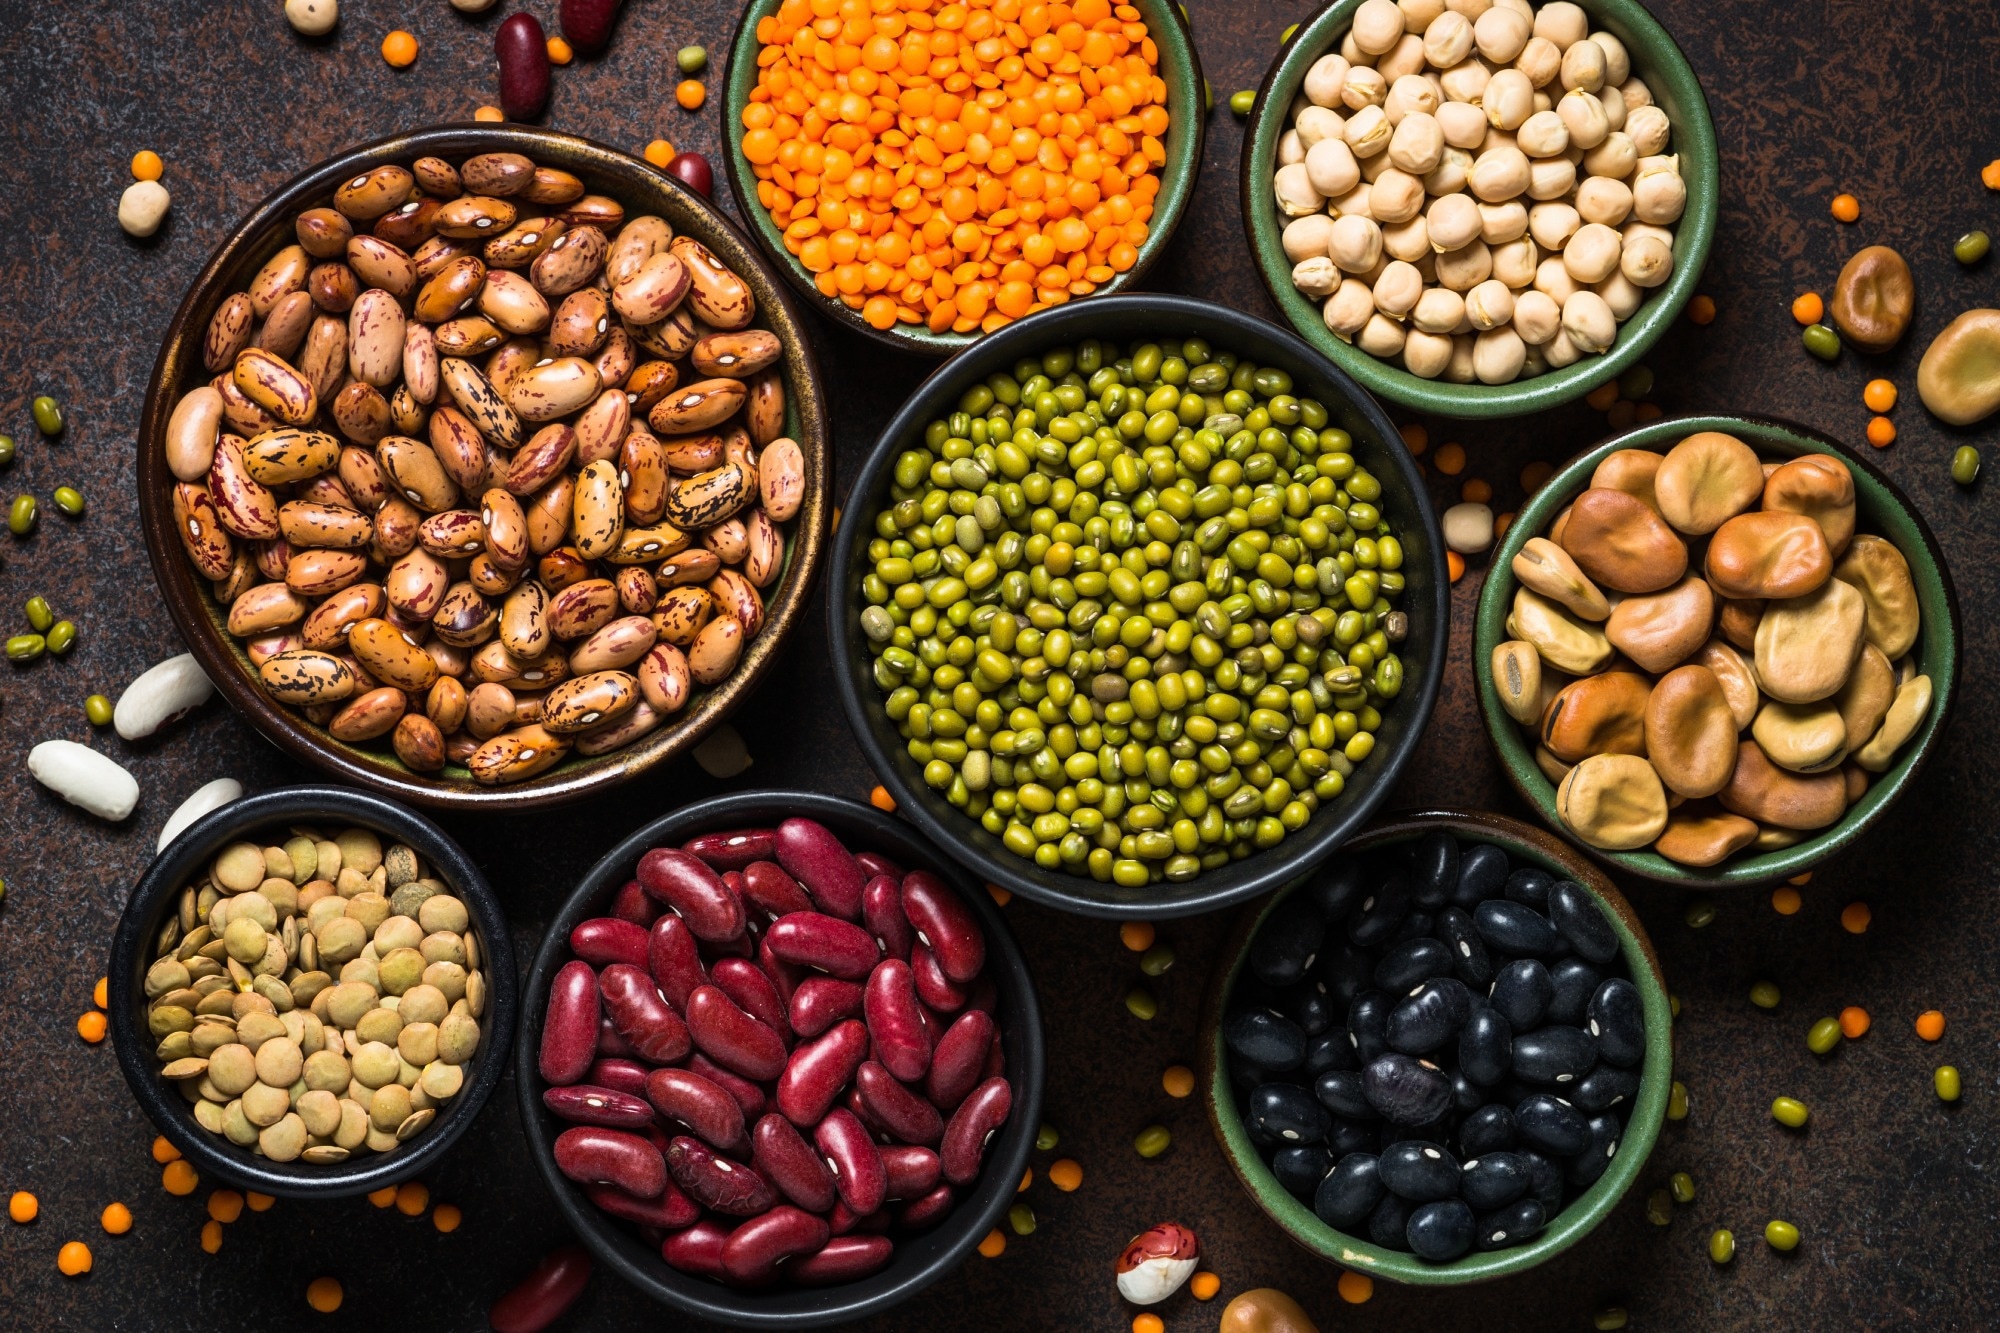 Study: Associations between Cardiometabolic Risk Factors and Increased Consumption of Diverse Legumes: A South African Food and Nutrition Security Programme Case Study. Image Credit: nadianb/Shutterstock.com